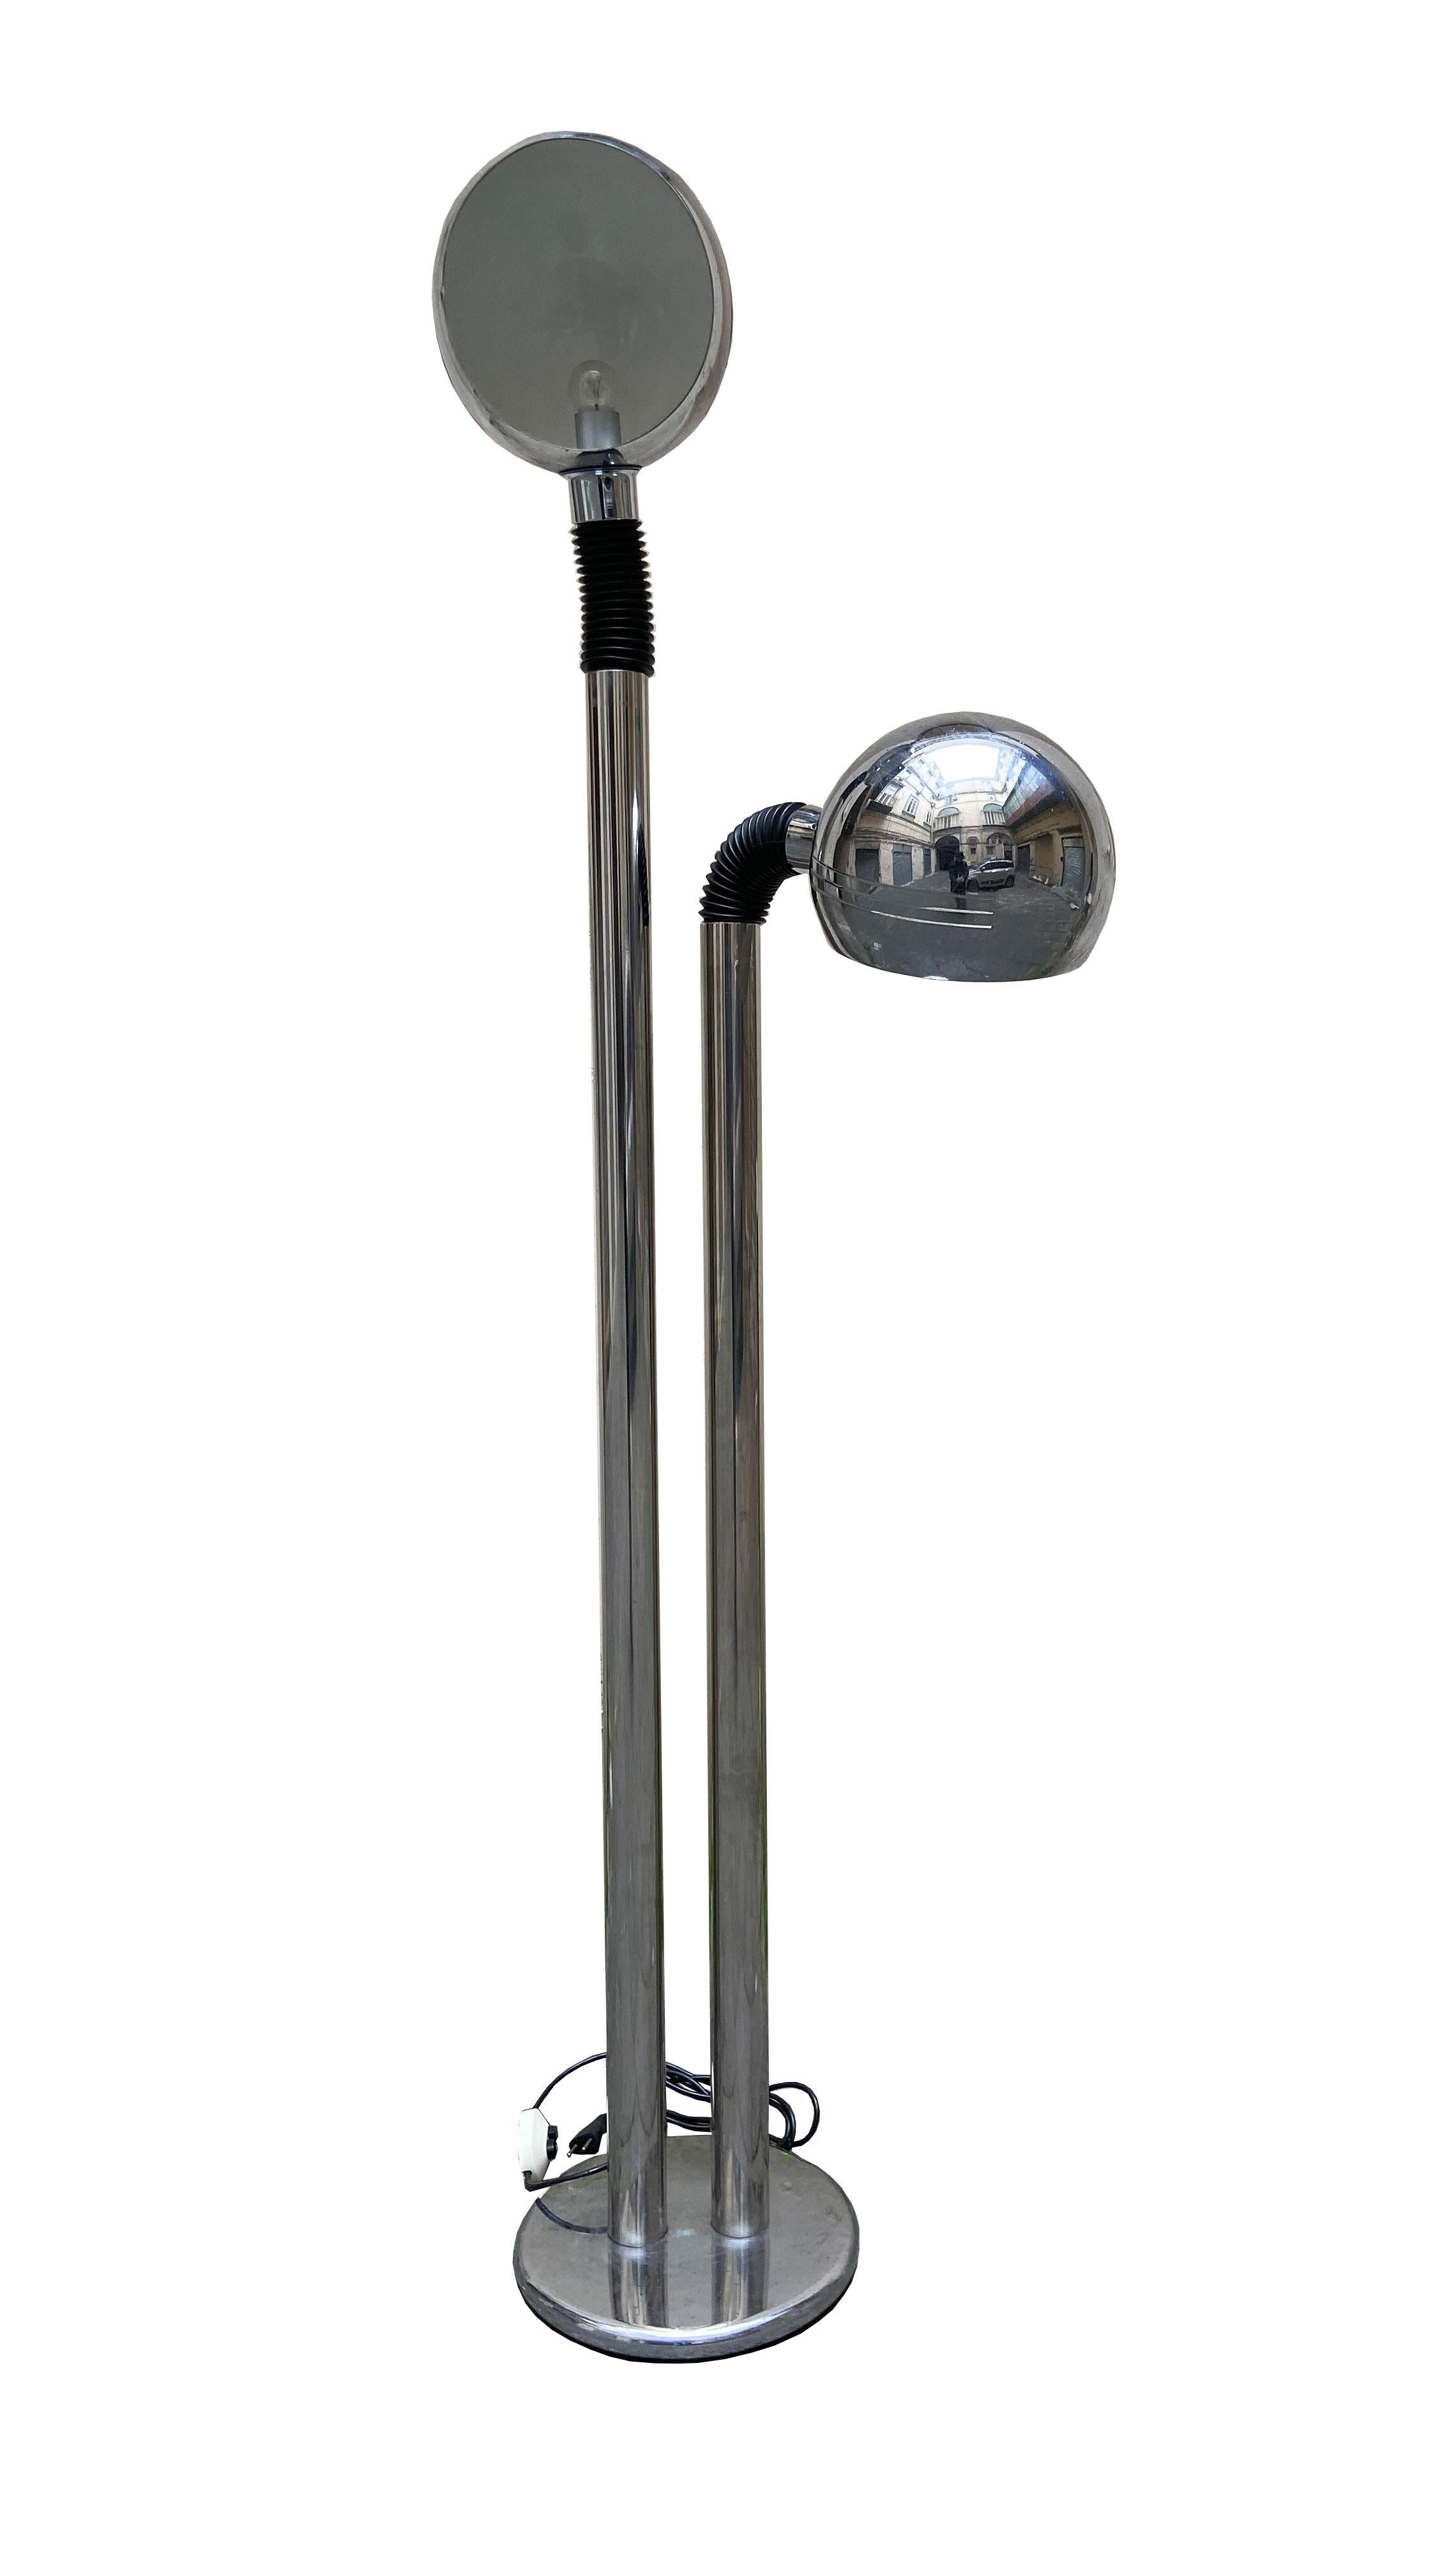 Floor lamp produced by Targetti, Italy, 1970s. The lamp made of chromed metal has two adjustable lights thanks to the flexible rubber neck, characteristic of Targetti lamps.